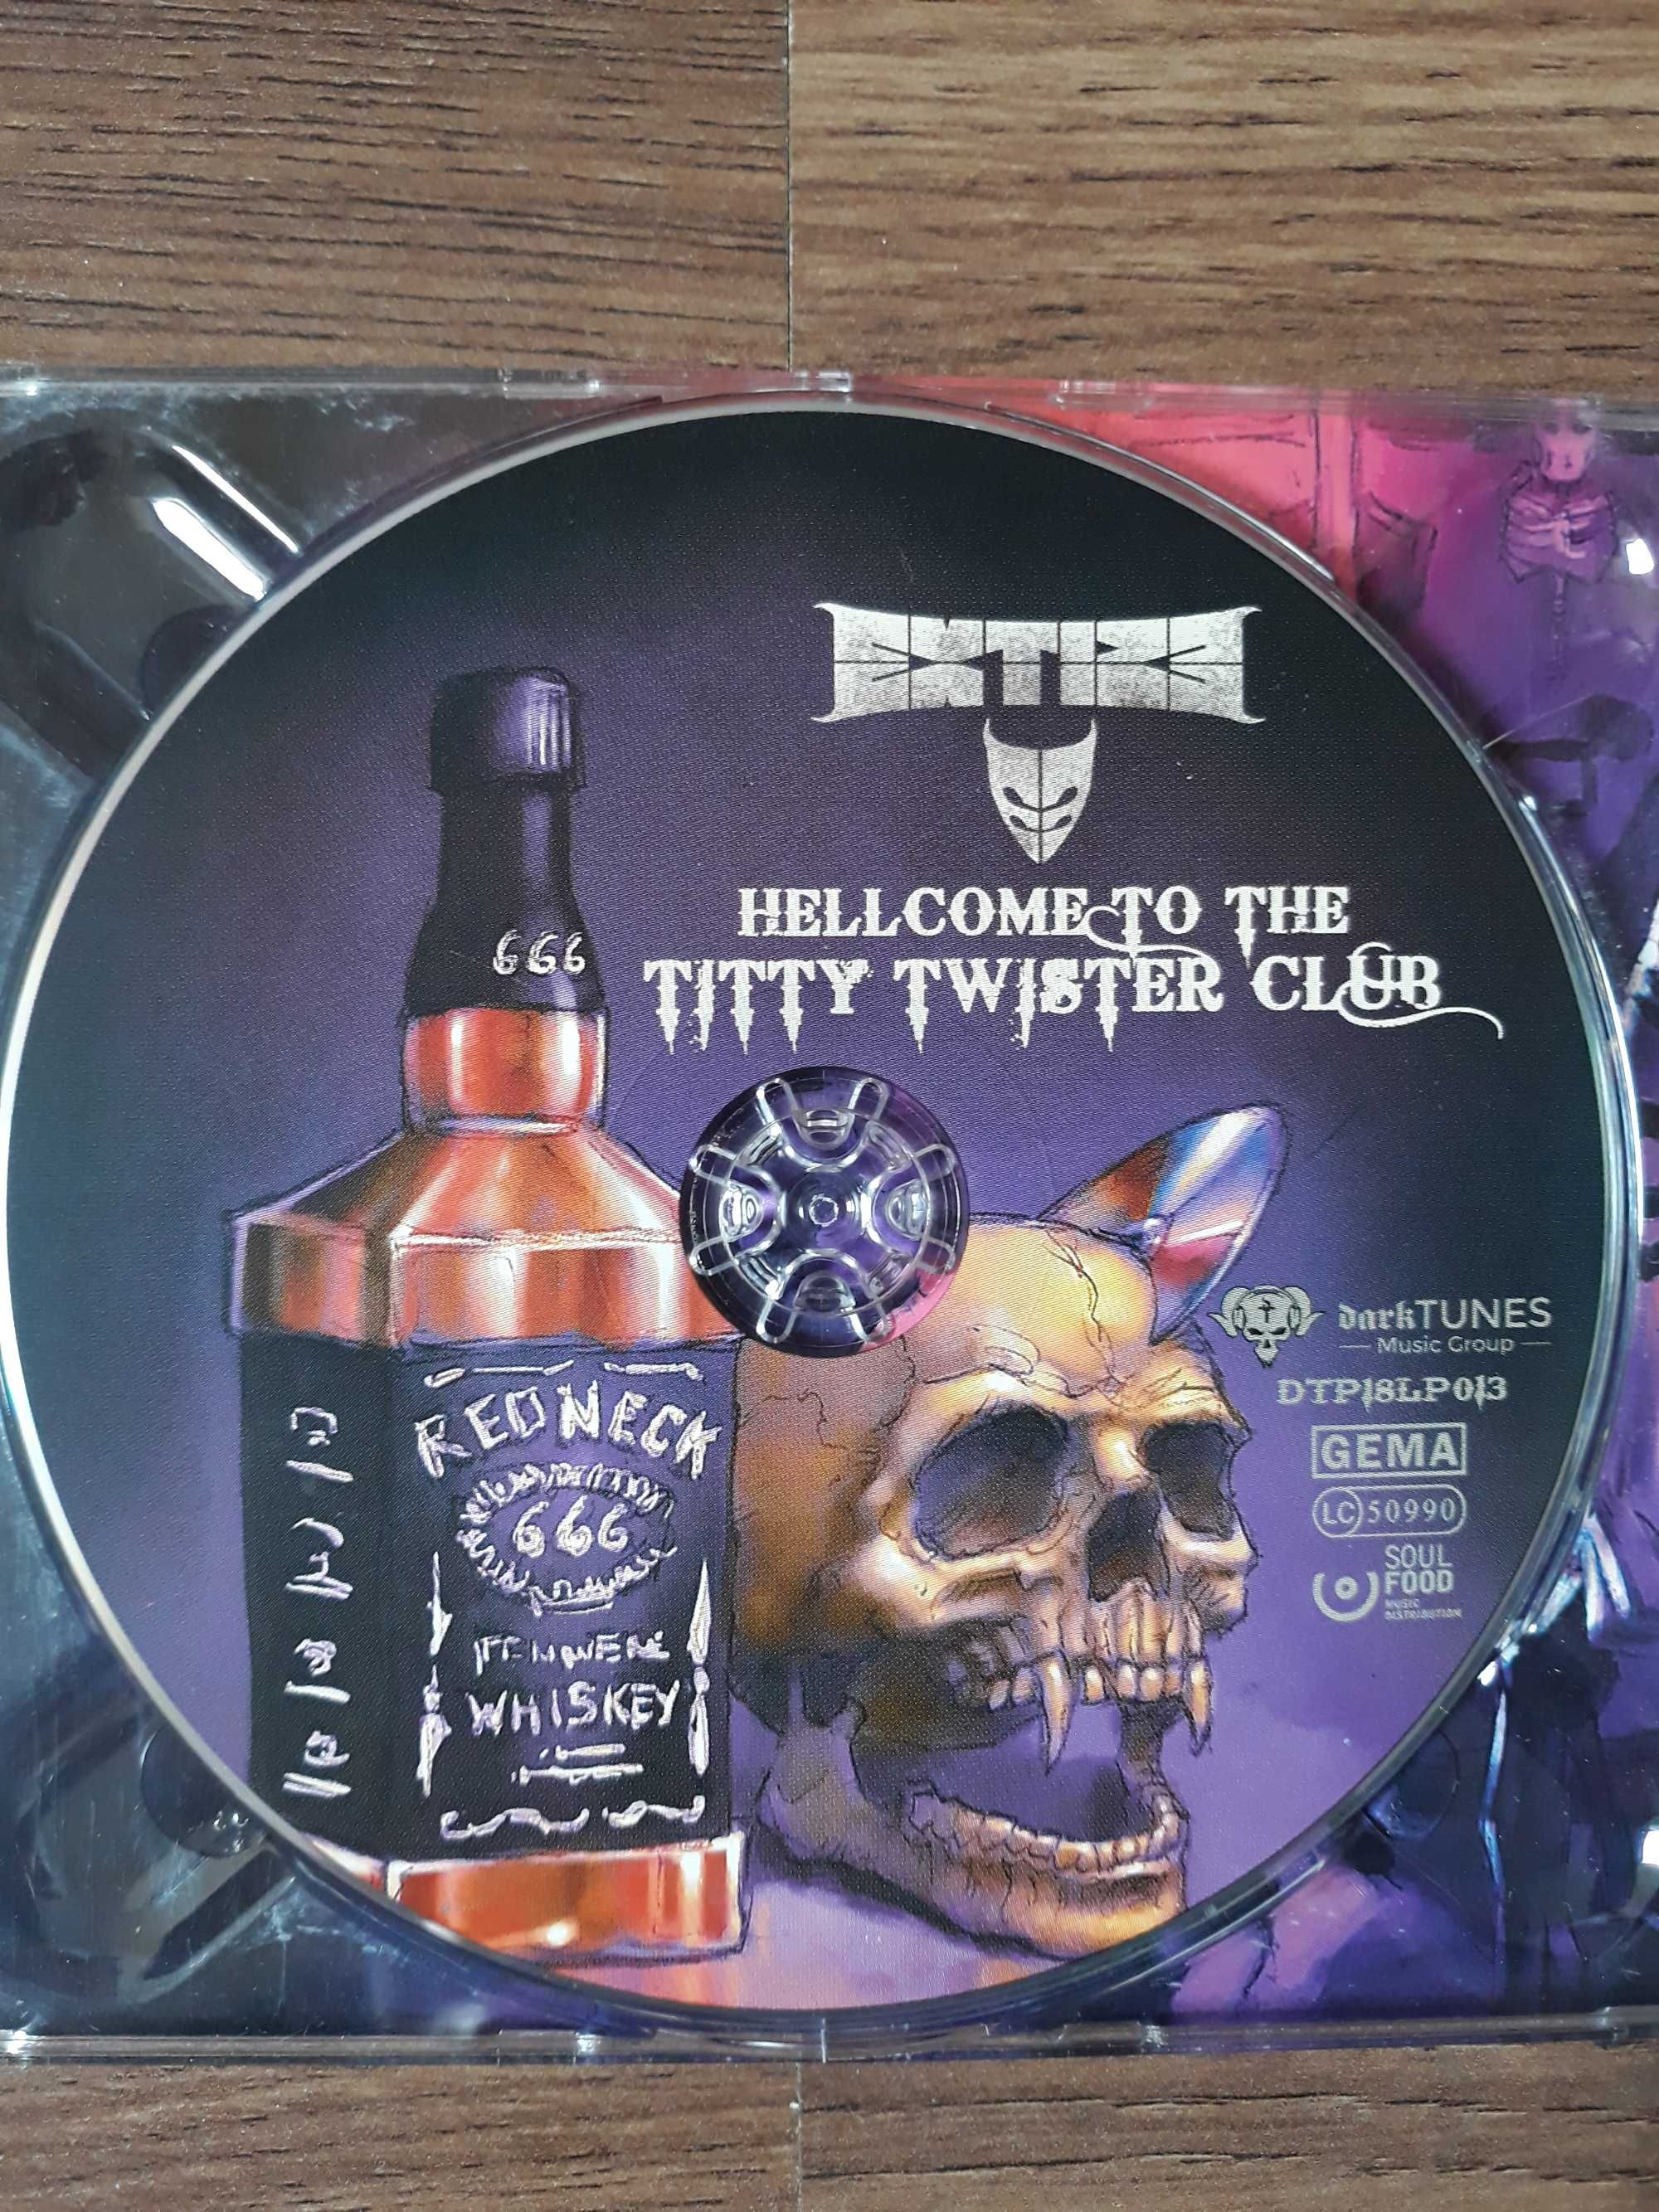 EXTIZE - Hellcome to the Titty Twister Club!